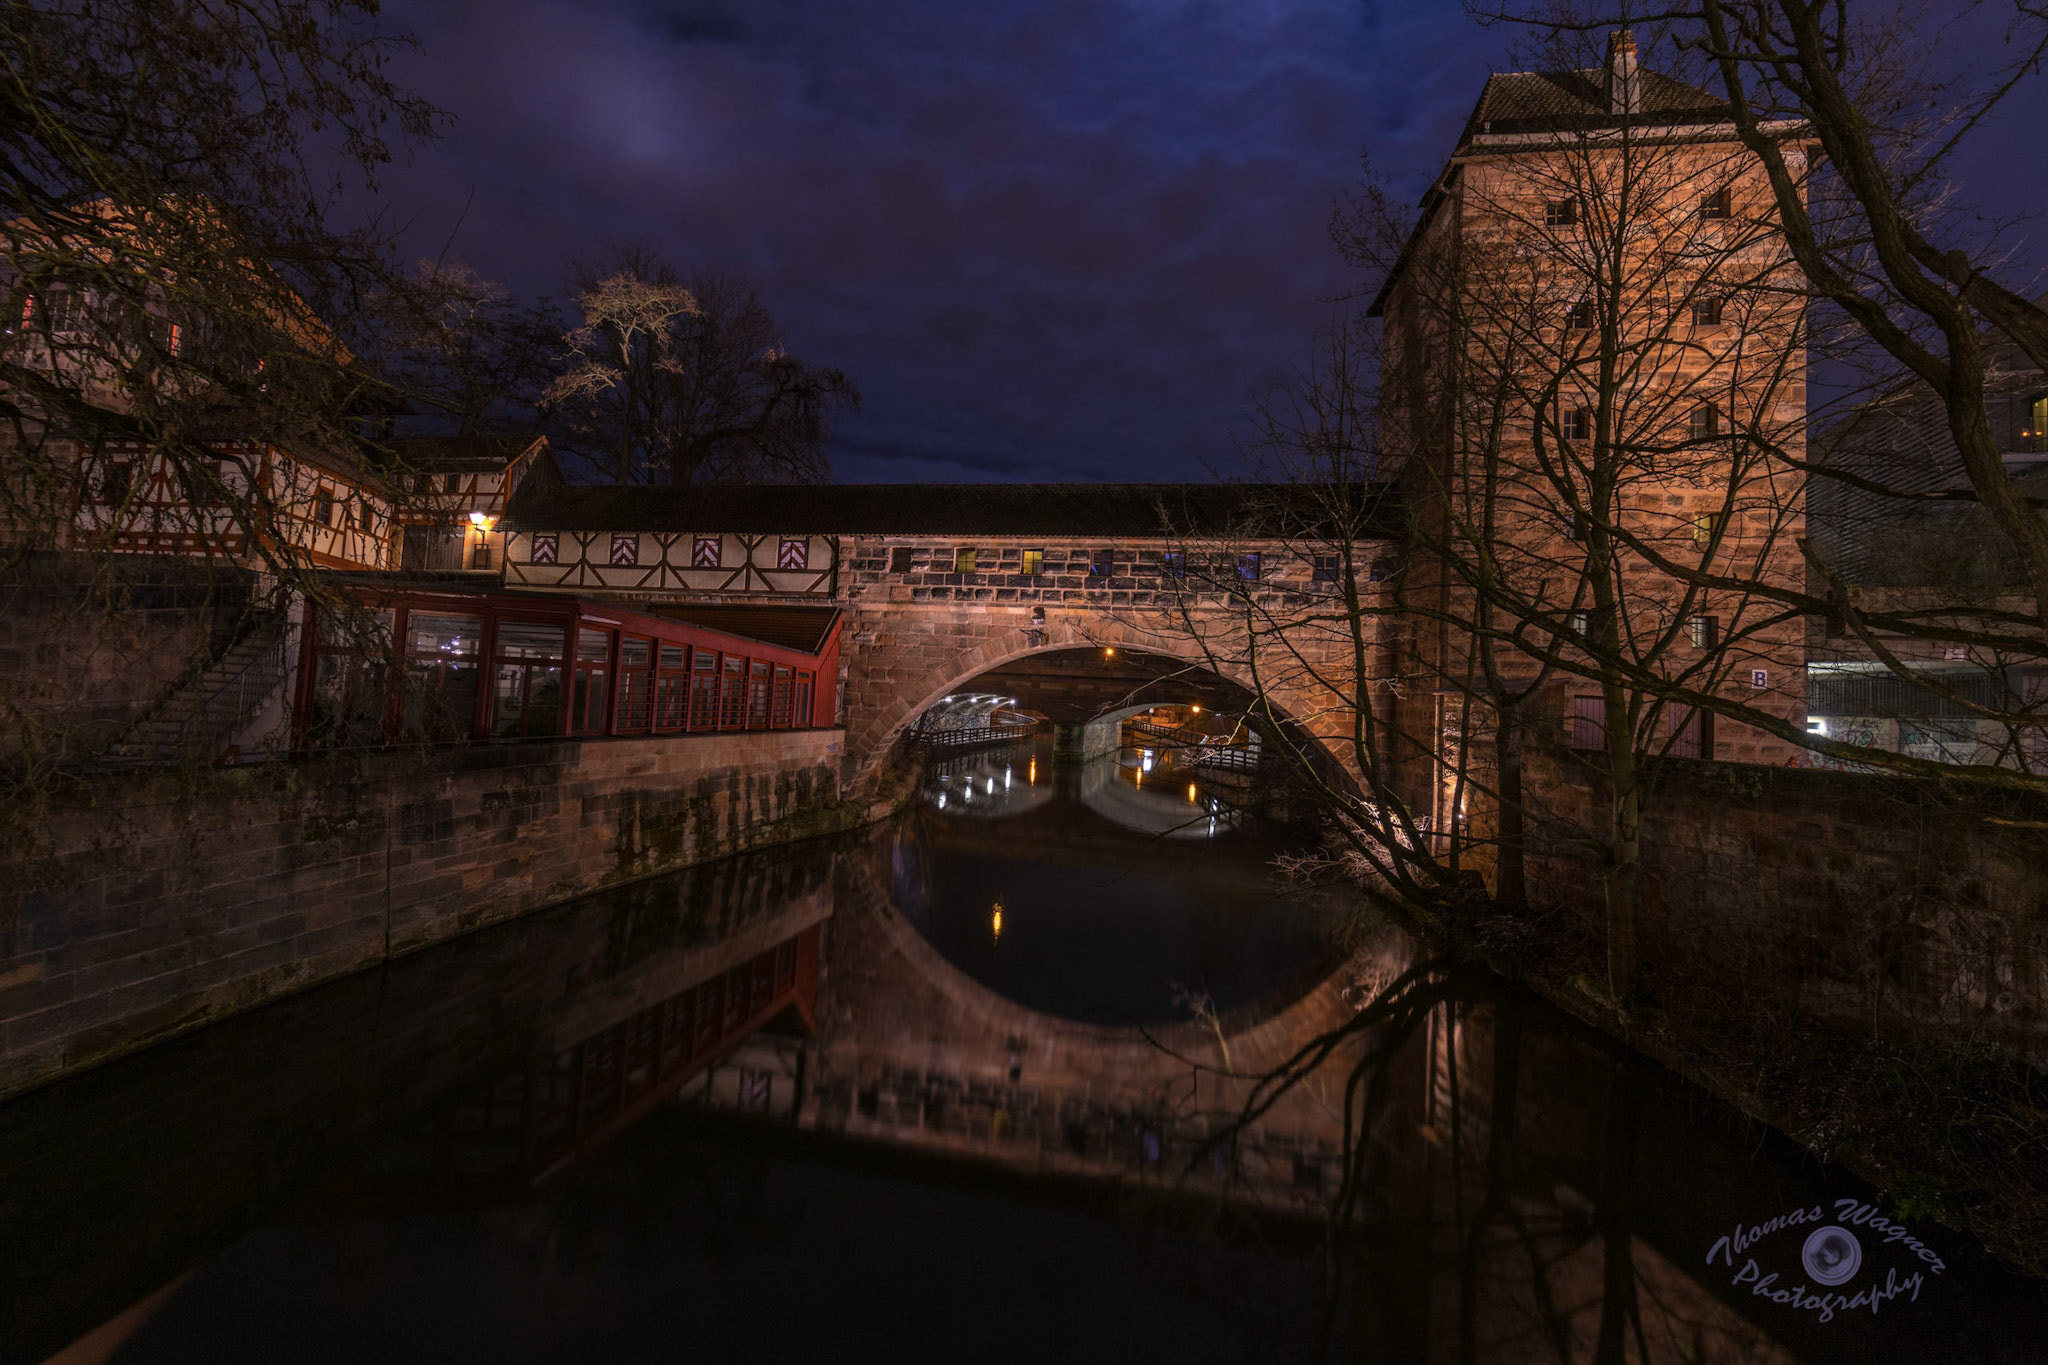 Sony a7 II sample photo. One night in nürnberg photography